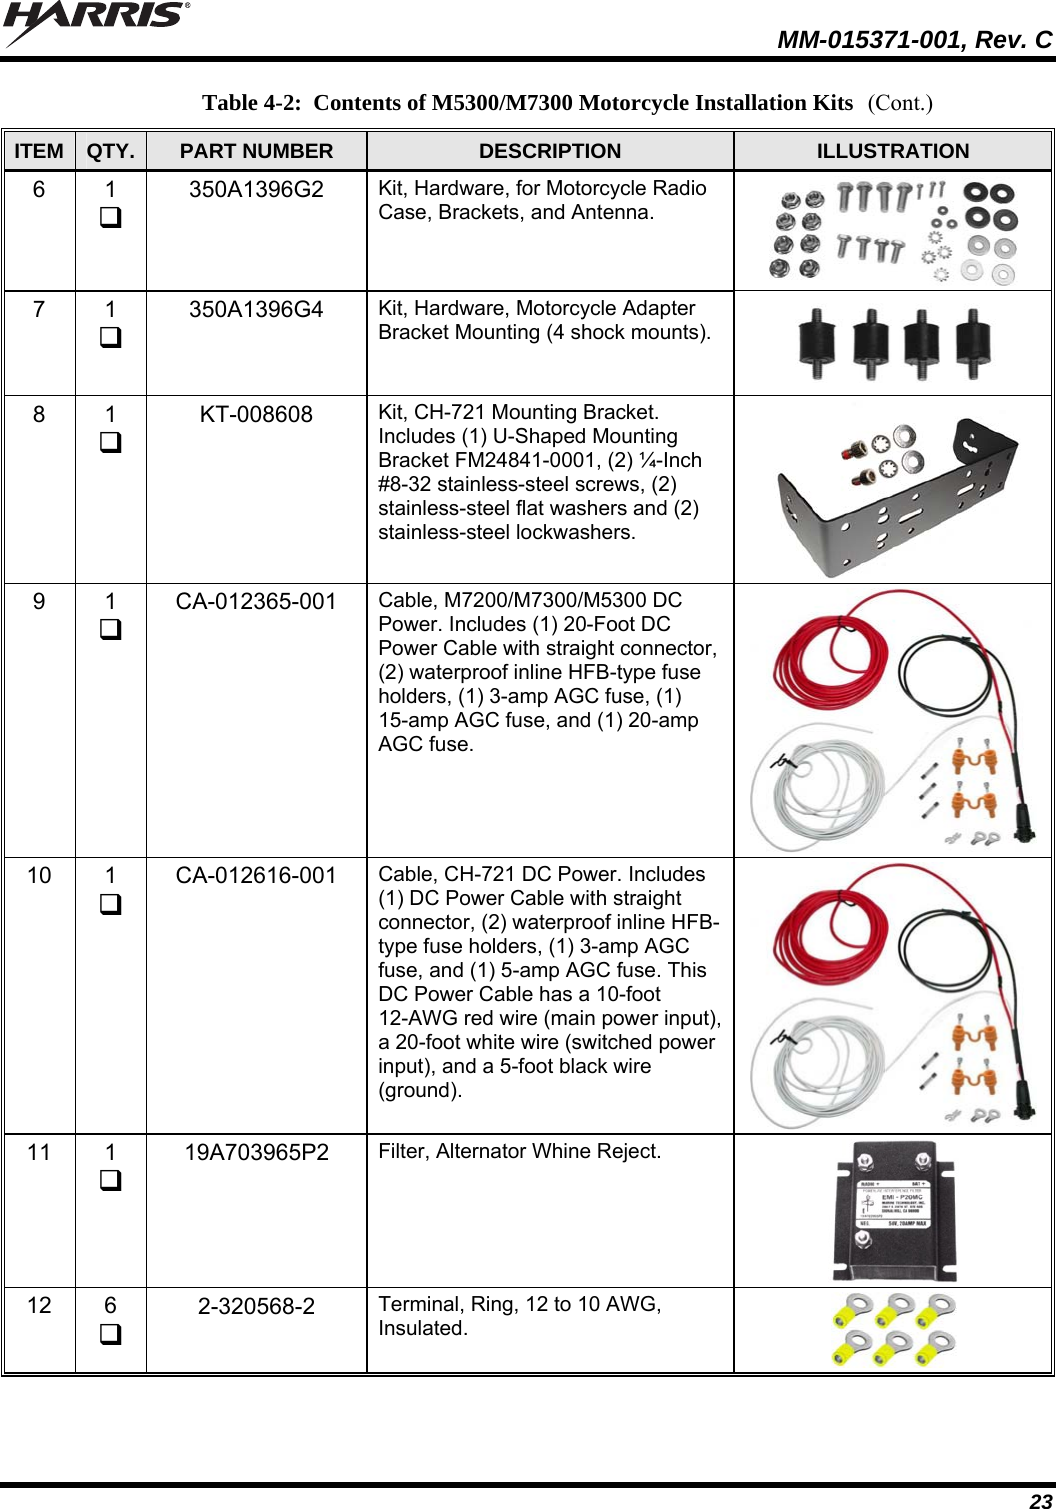   MM-015371-001, Rev. C 23 Table 4-2:  Contents of M5300/M7300 Motorcycle Installation Kits ITEM  QTY.  PART NUMBER  DESCRIPTION  ILLUSTRATION 6 1  350A1396G2  Kit, Hardware, for Motorcycle Radio Case, Brackets, and Antenna.  7 1  350A1396G4  Kit, Hardware, Motorcycle Adapter Bracket Mounting (4 shock mounts).  8 1  KT-008608  Kit, CH-721 Mounting Bracket. Includes (1) U-Shaped Mounting Bracket FM24841-0001, (2) ¼-Inch #8-32 stainless-steel screws, (2) stainless-steel flat washers and (2) stainless-steel lockwashers.  9 1  CA-012365-001  Cable, M7200/M7300/M5300 DC Power. Includes (1) 20-Foot DC Power Cable with straight connector, (2) waterproof inline HFB-type fuse holders, (1) 3-amp AGC fuse, (1) 15-amp AGC fuse, and (1) 20-amp AGC fuse.  10 1  CA-012616-001  Cable, CH-721 DC Power. Includes (1) DC Power Cable with straight connector, (2) waterproof inline HFB-type fuse holders, (1) 3-amp AGC fuse, and (1) 5-amp AGC fuse. This DC Power Cable has a 10-foot 12-AWG red wire (main power input), a 20-foot white wire (switched power input), and a 5-foot black wire (ground).  11 1  19A703965P2  Filter, Alternator Whine Reject.  12 6  2-320568-2  Terminal, Ring, 12 to 10 AWG, Insulated.  (Cont.) 